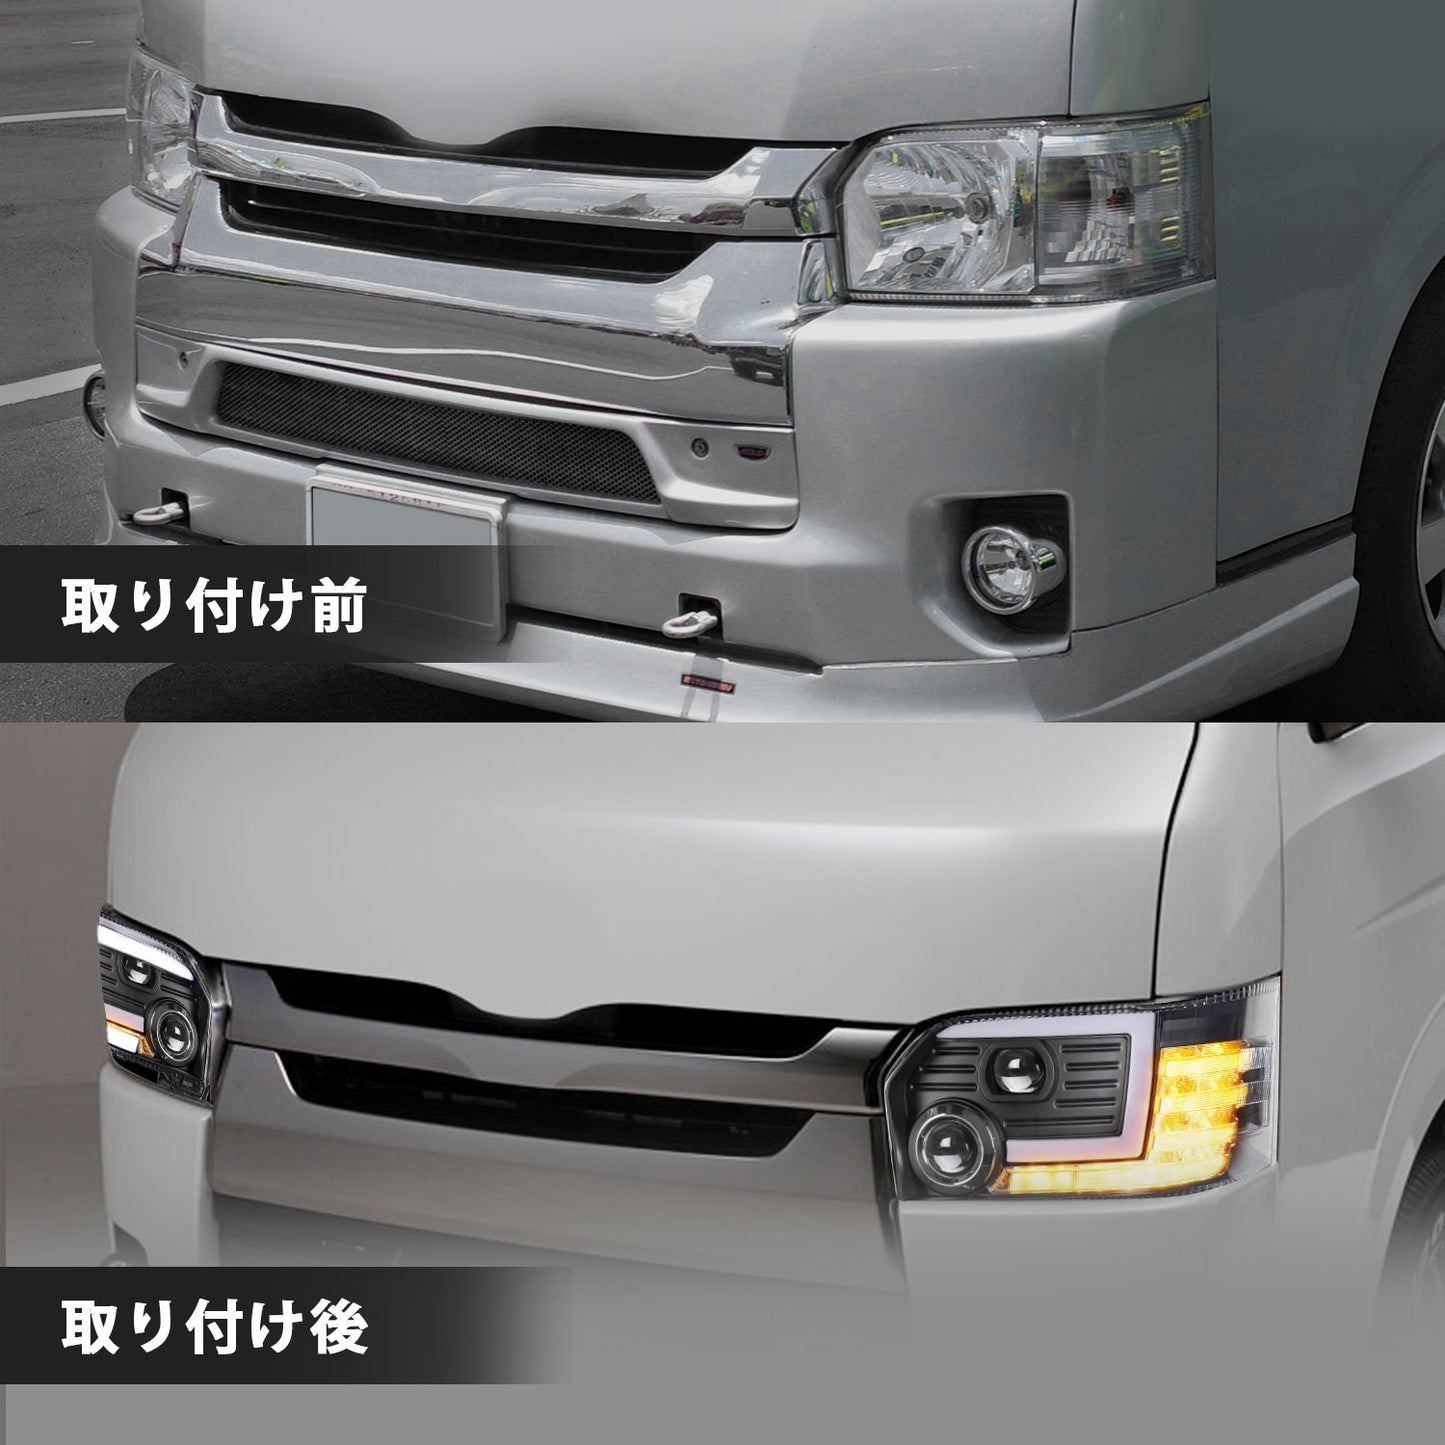 Full LED Headlights Assembly For Toyota Hiace 2005-2018